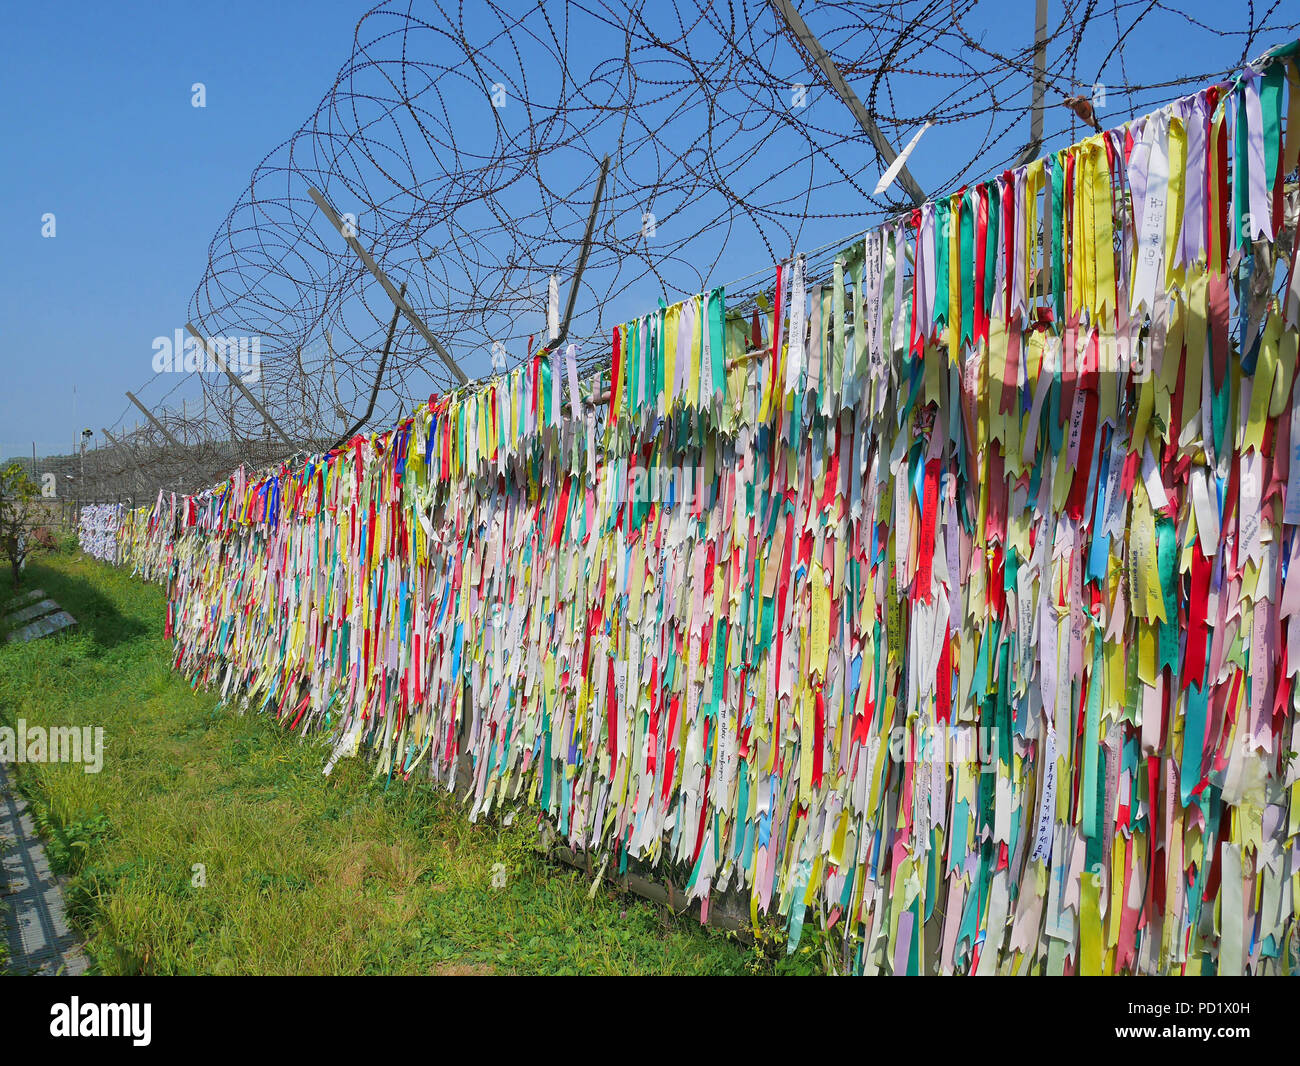 PAJU, SOUTH KOREA - SEPTEMBER 26, 2017: Colorful prayer ribbons at Imjingak Park near DMZ or demilitarized zone. South Koreans tie these ribbons with  Stock Photo